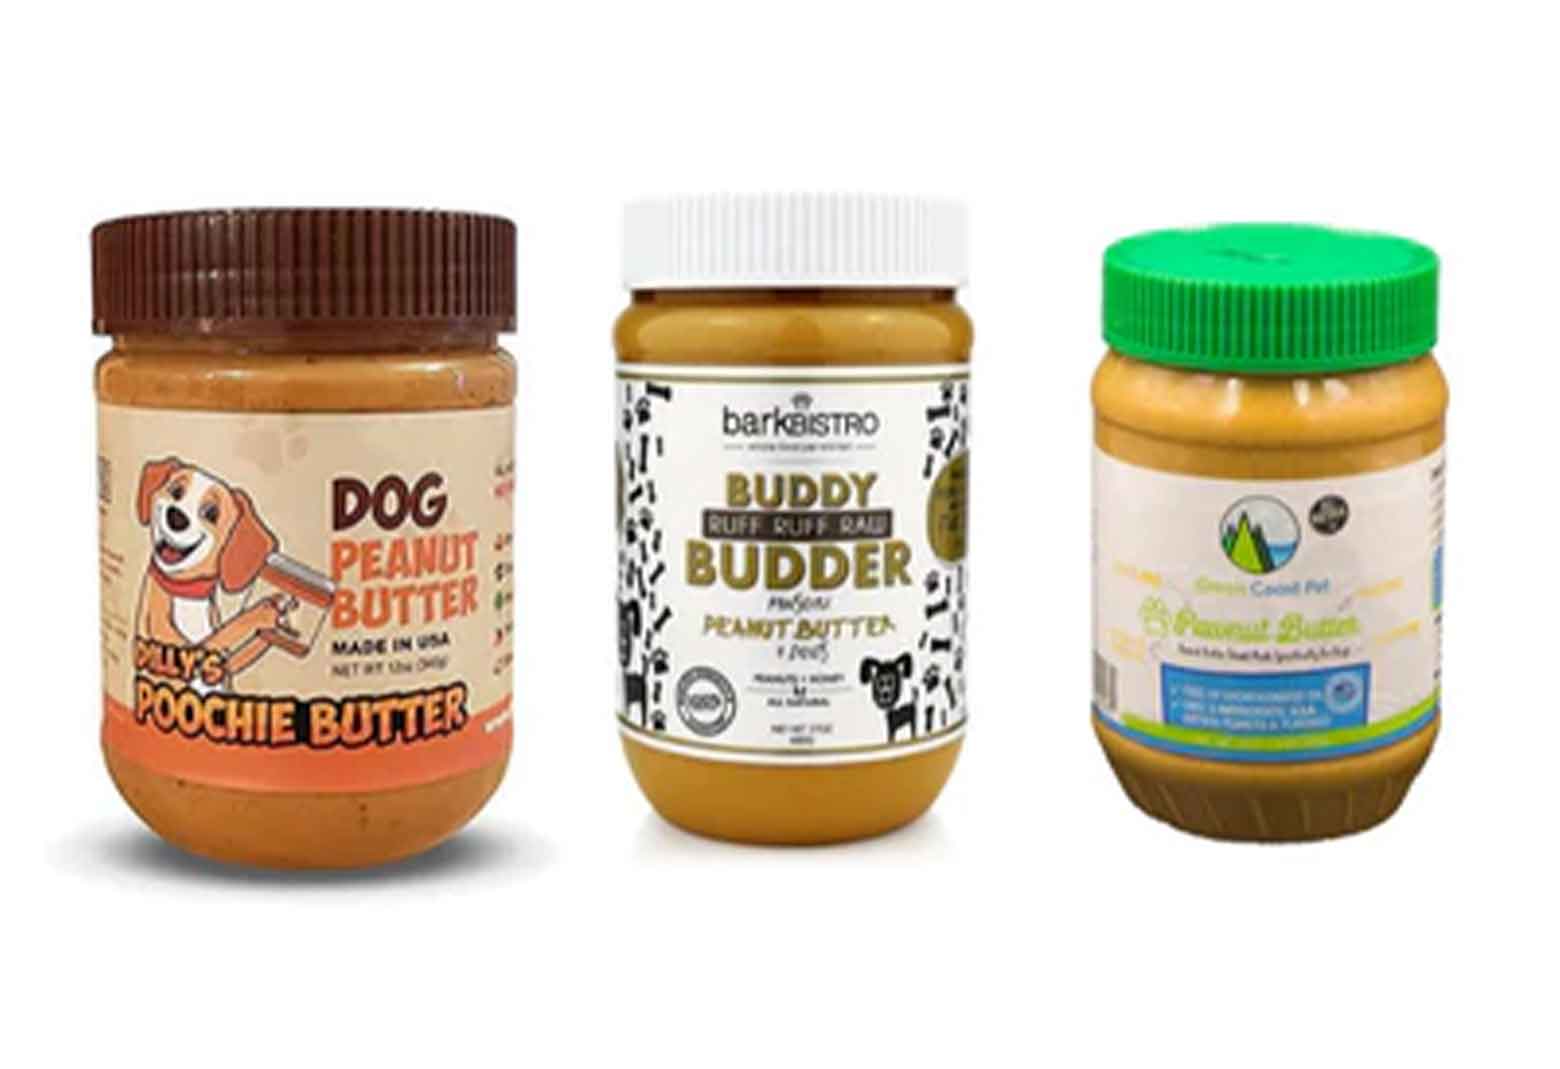 Lineup Of Different Brands Of Dog Peanut Butter